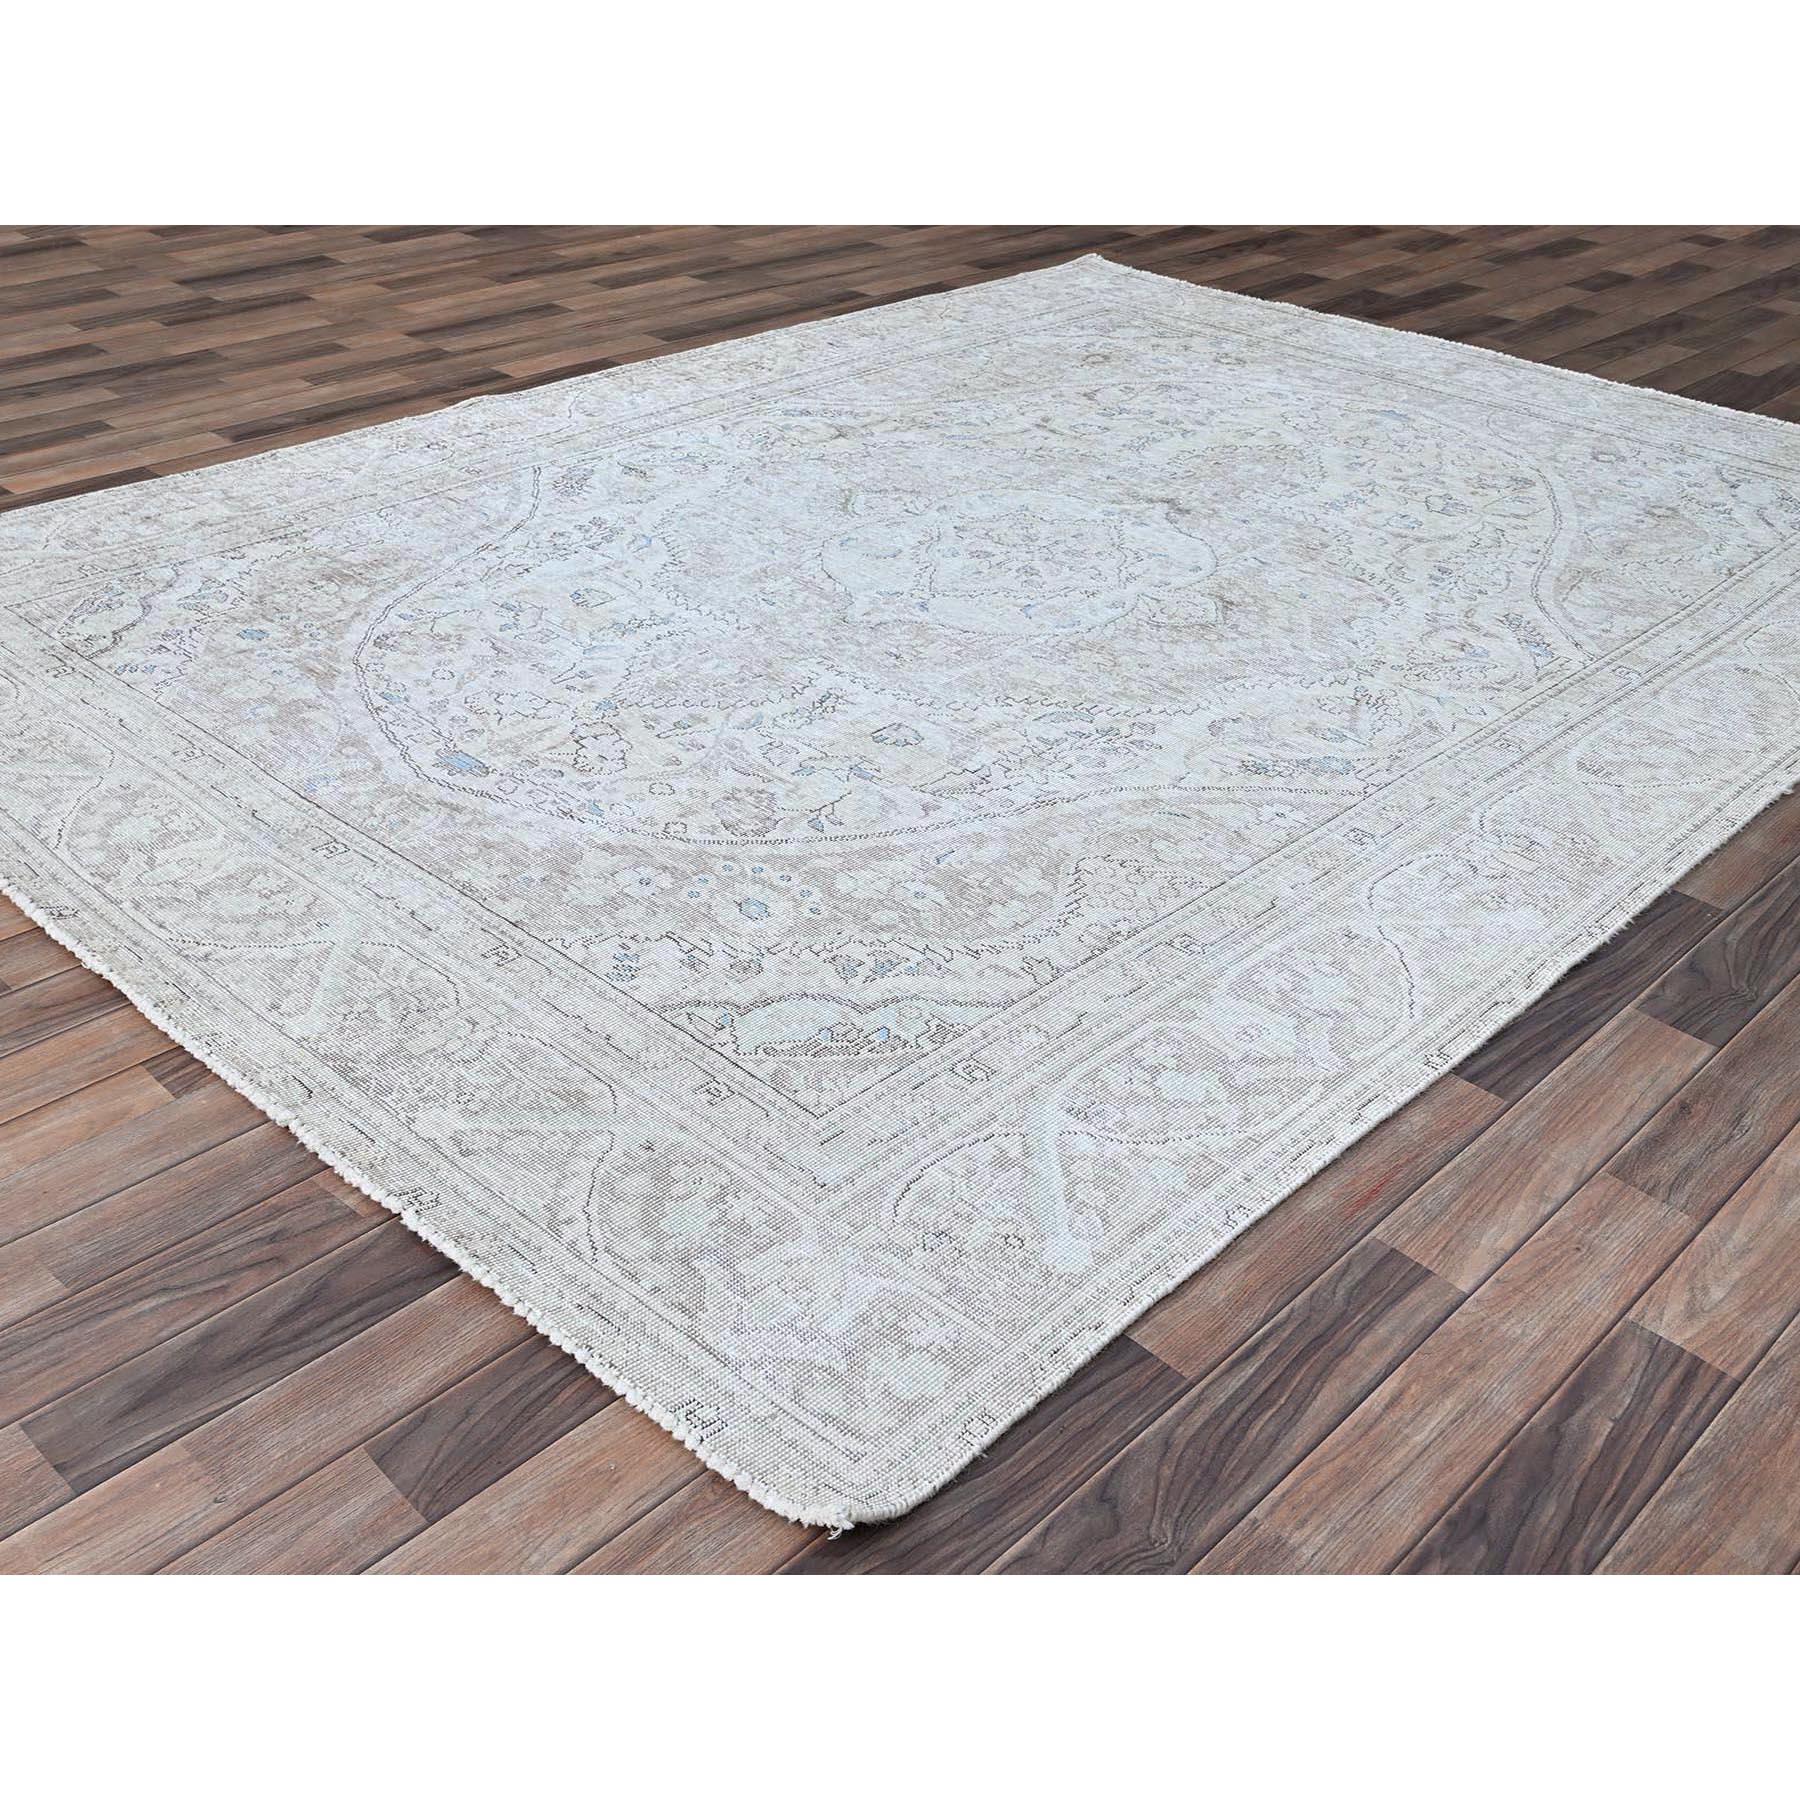 Ivory Evenly Worn Wool Vintage Persian White Wash Tabriz Hand Knotted Clean Rug In Excellent Condition For Sale In Carlstadt, NJ